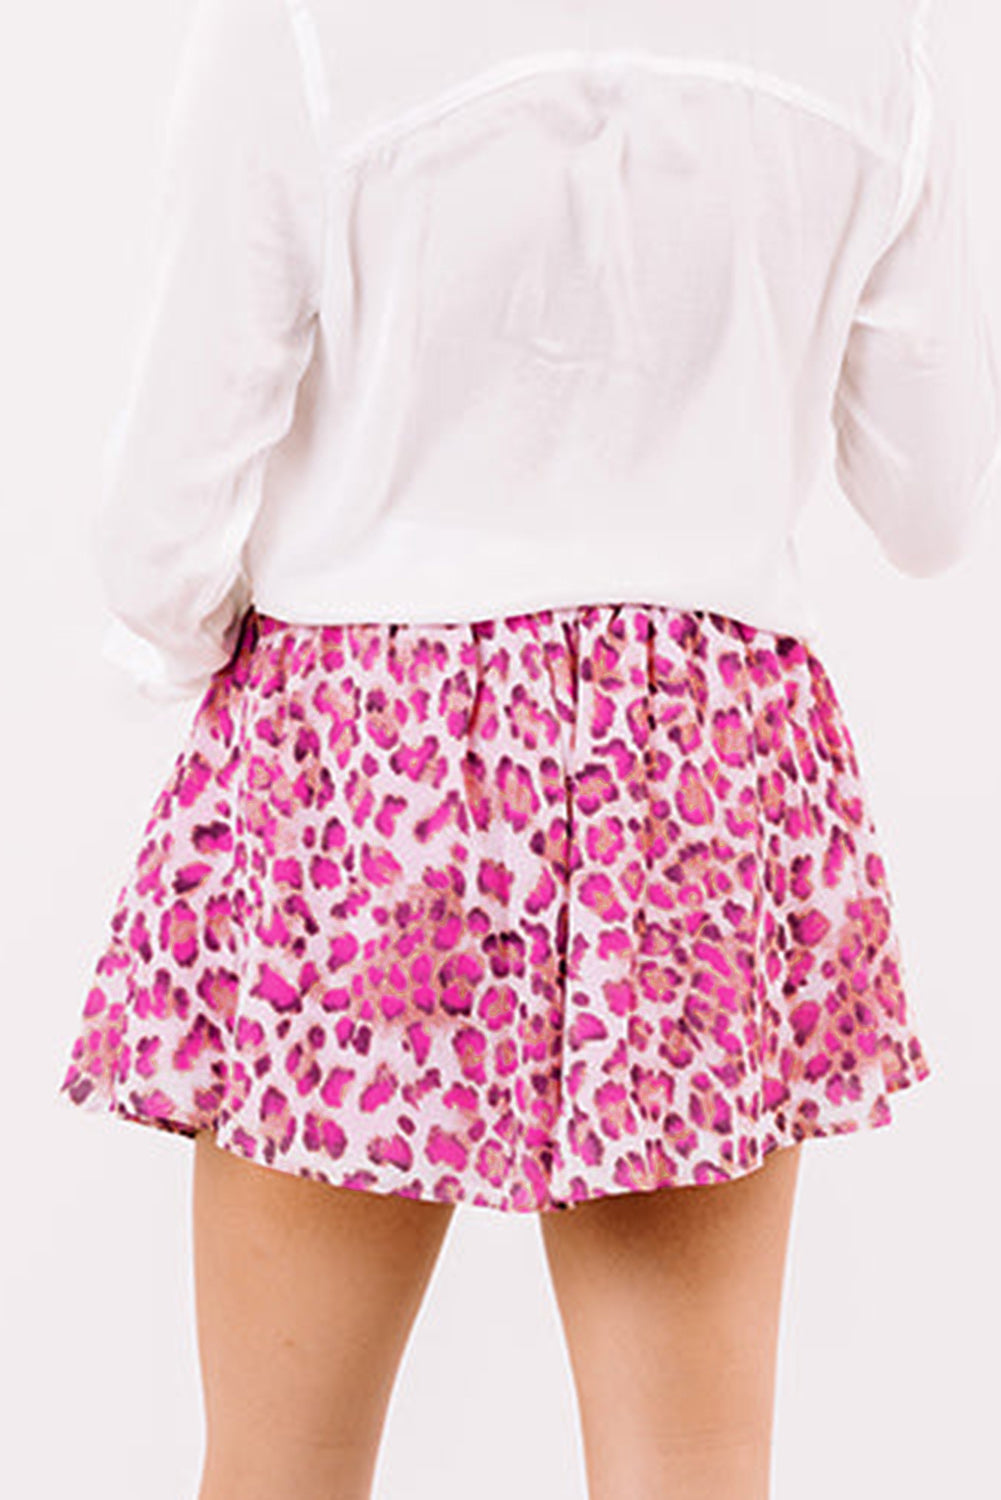 LC731280-6-S, LC731280-6-M, LC731280-6-L, LC731280-6-XL, Rose Leopard Print Flutter Casual Shorts